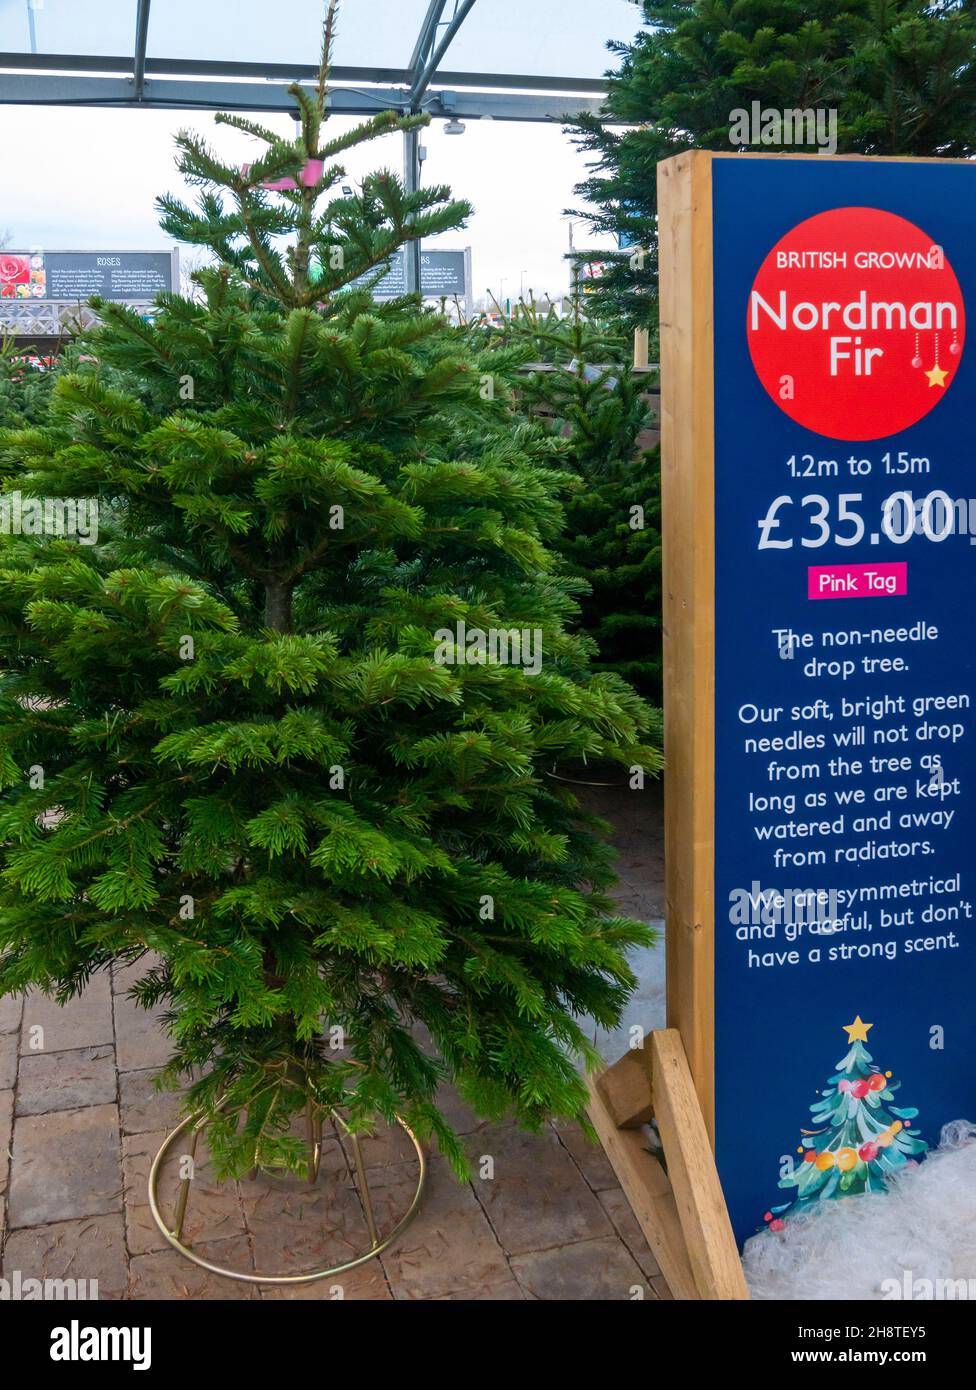 British grown Nordmann fir trees for sale at Christmas the advantage of this variety is that the needles are soft and do not fall price £35 for 1.5 me Stock Photo